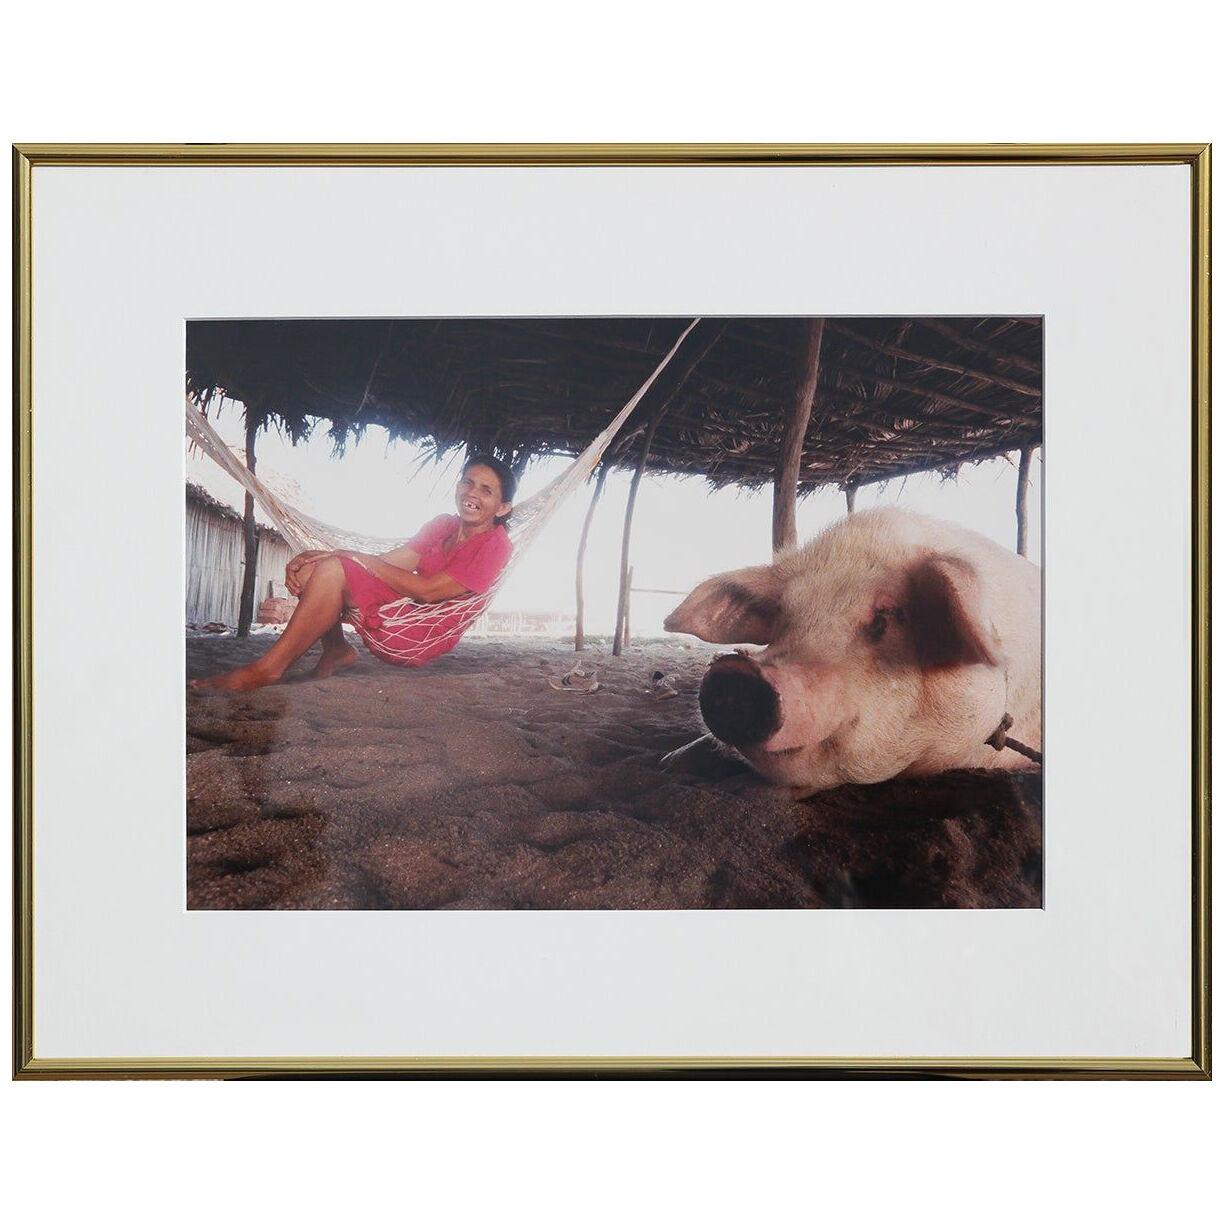 Daily Life Beach Color Photograph of a Smiling Woman in a Hammock with a Pig